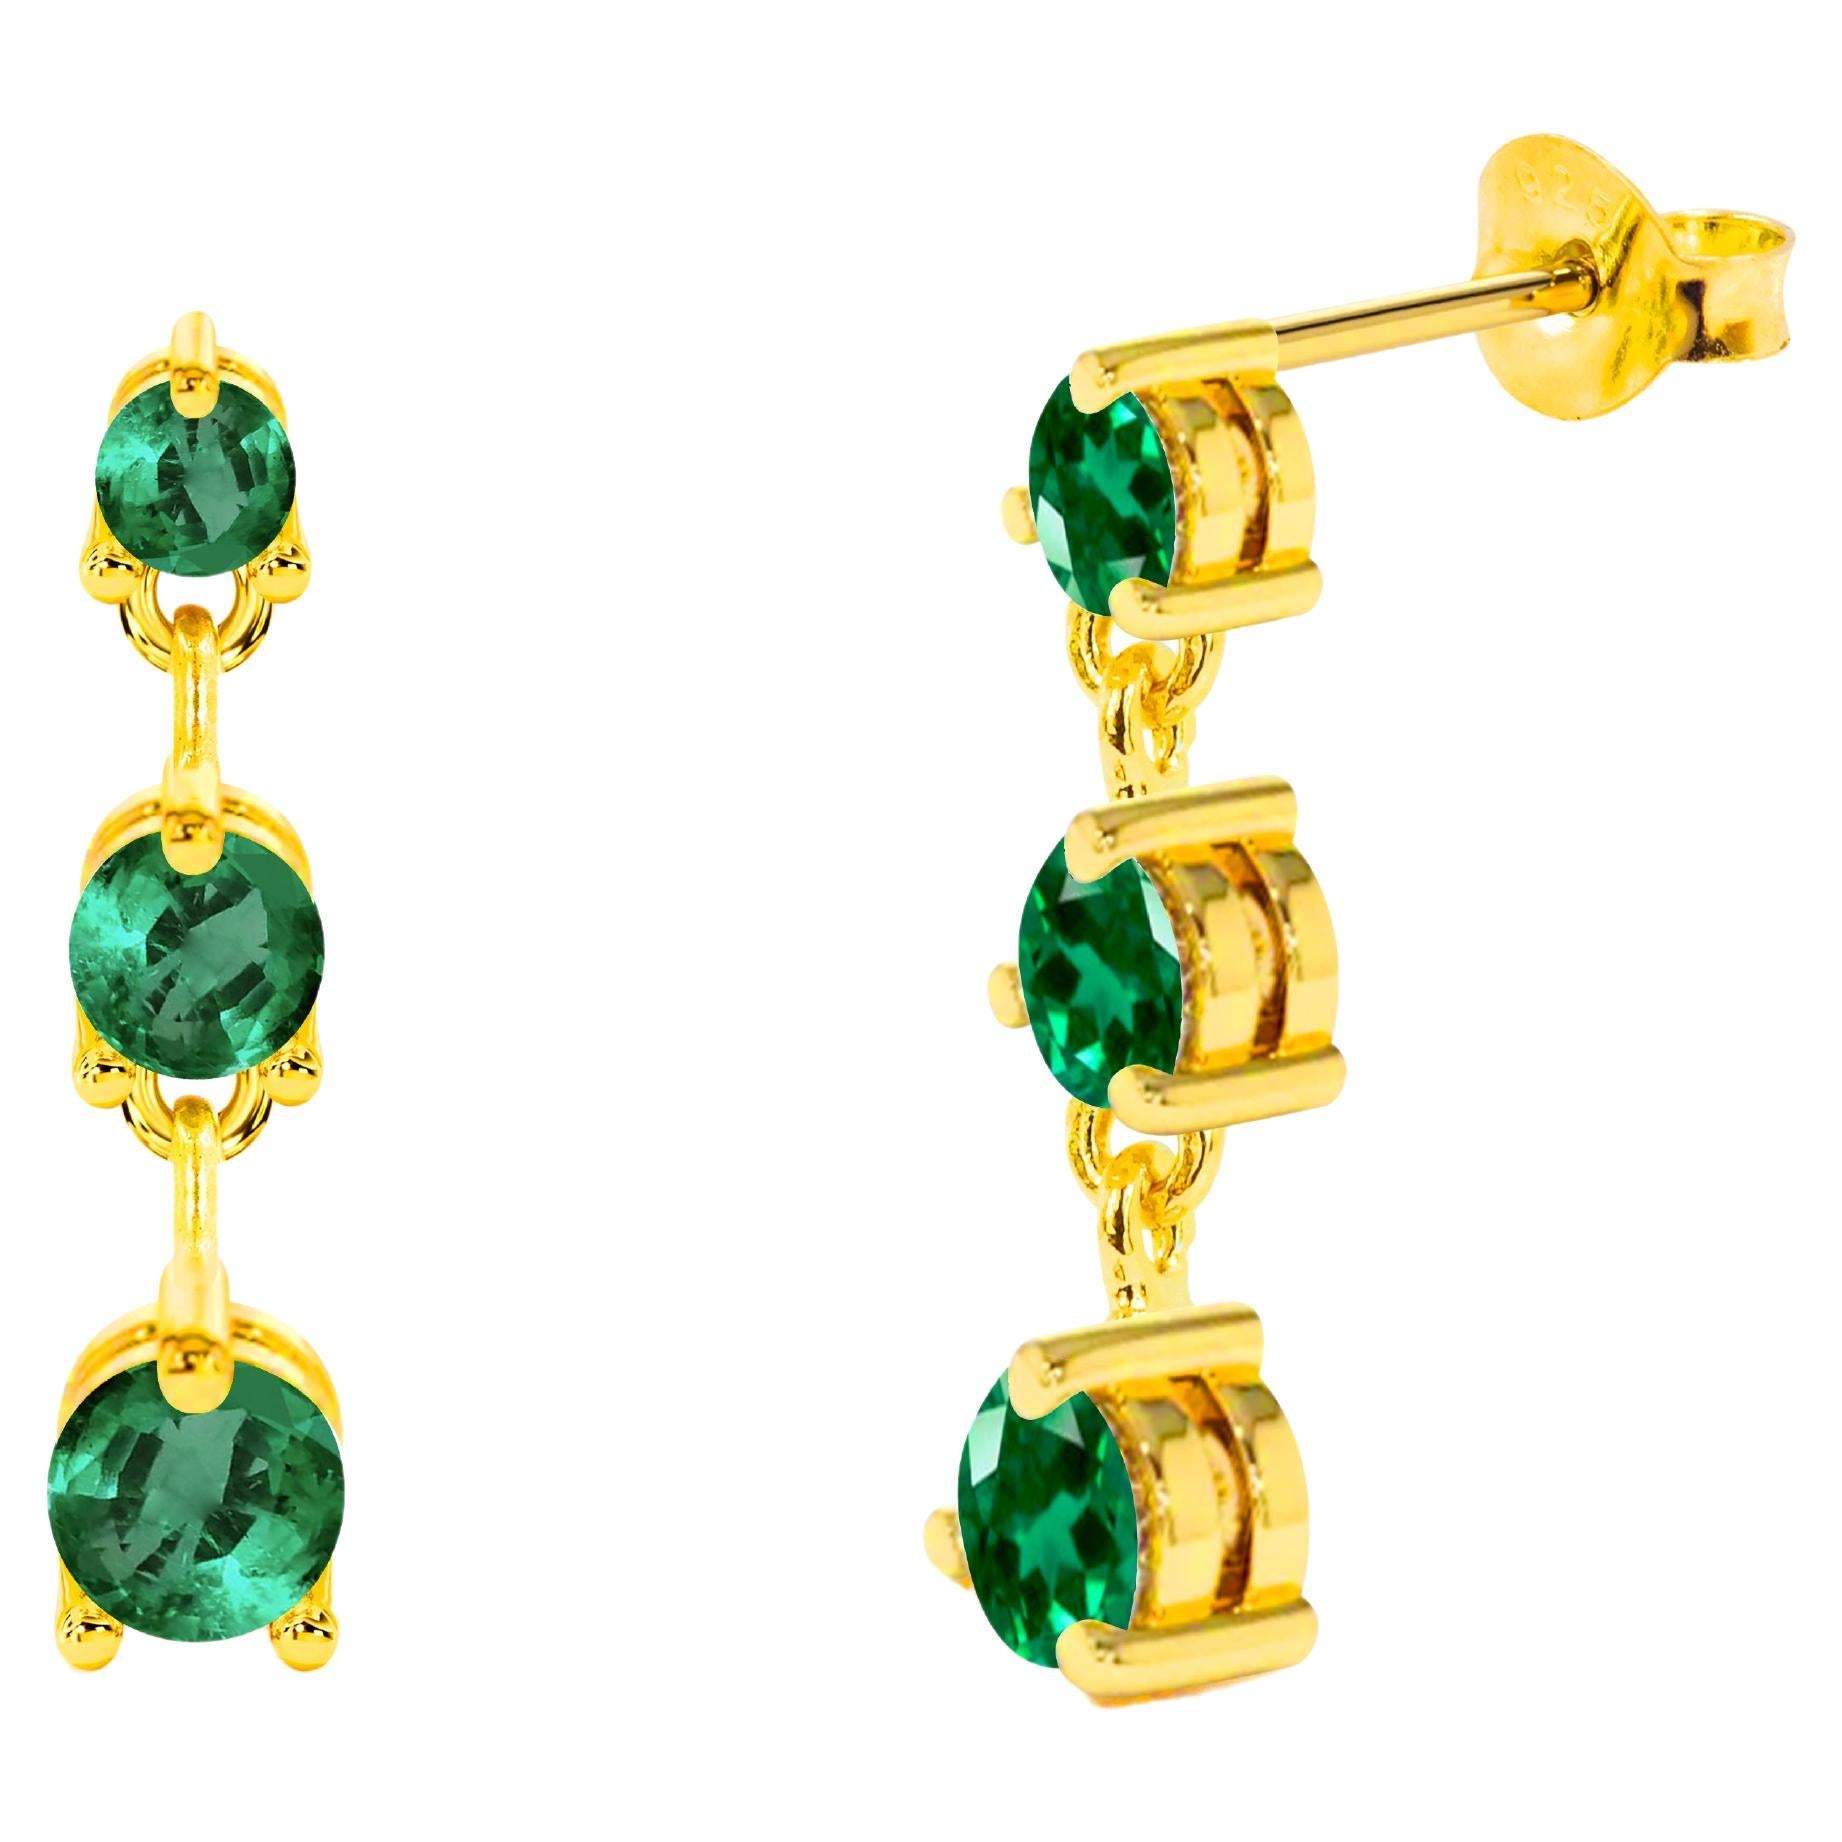 0.45ct Emerald Studs Earrings in 18k Gold For Sale